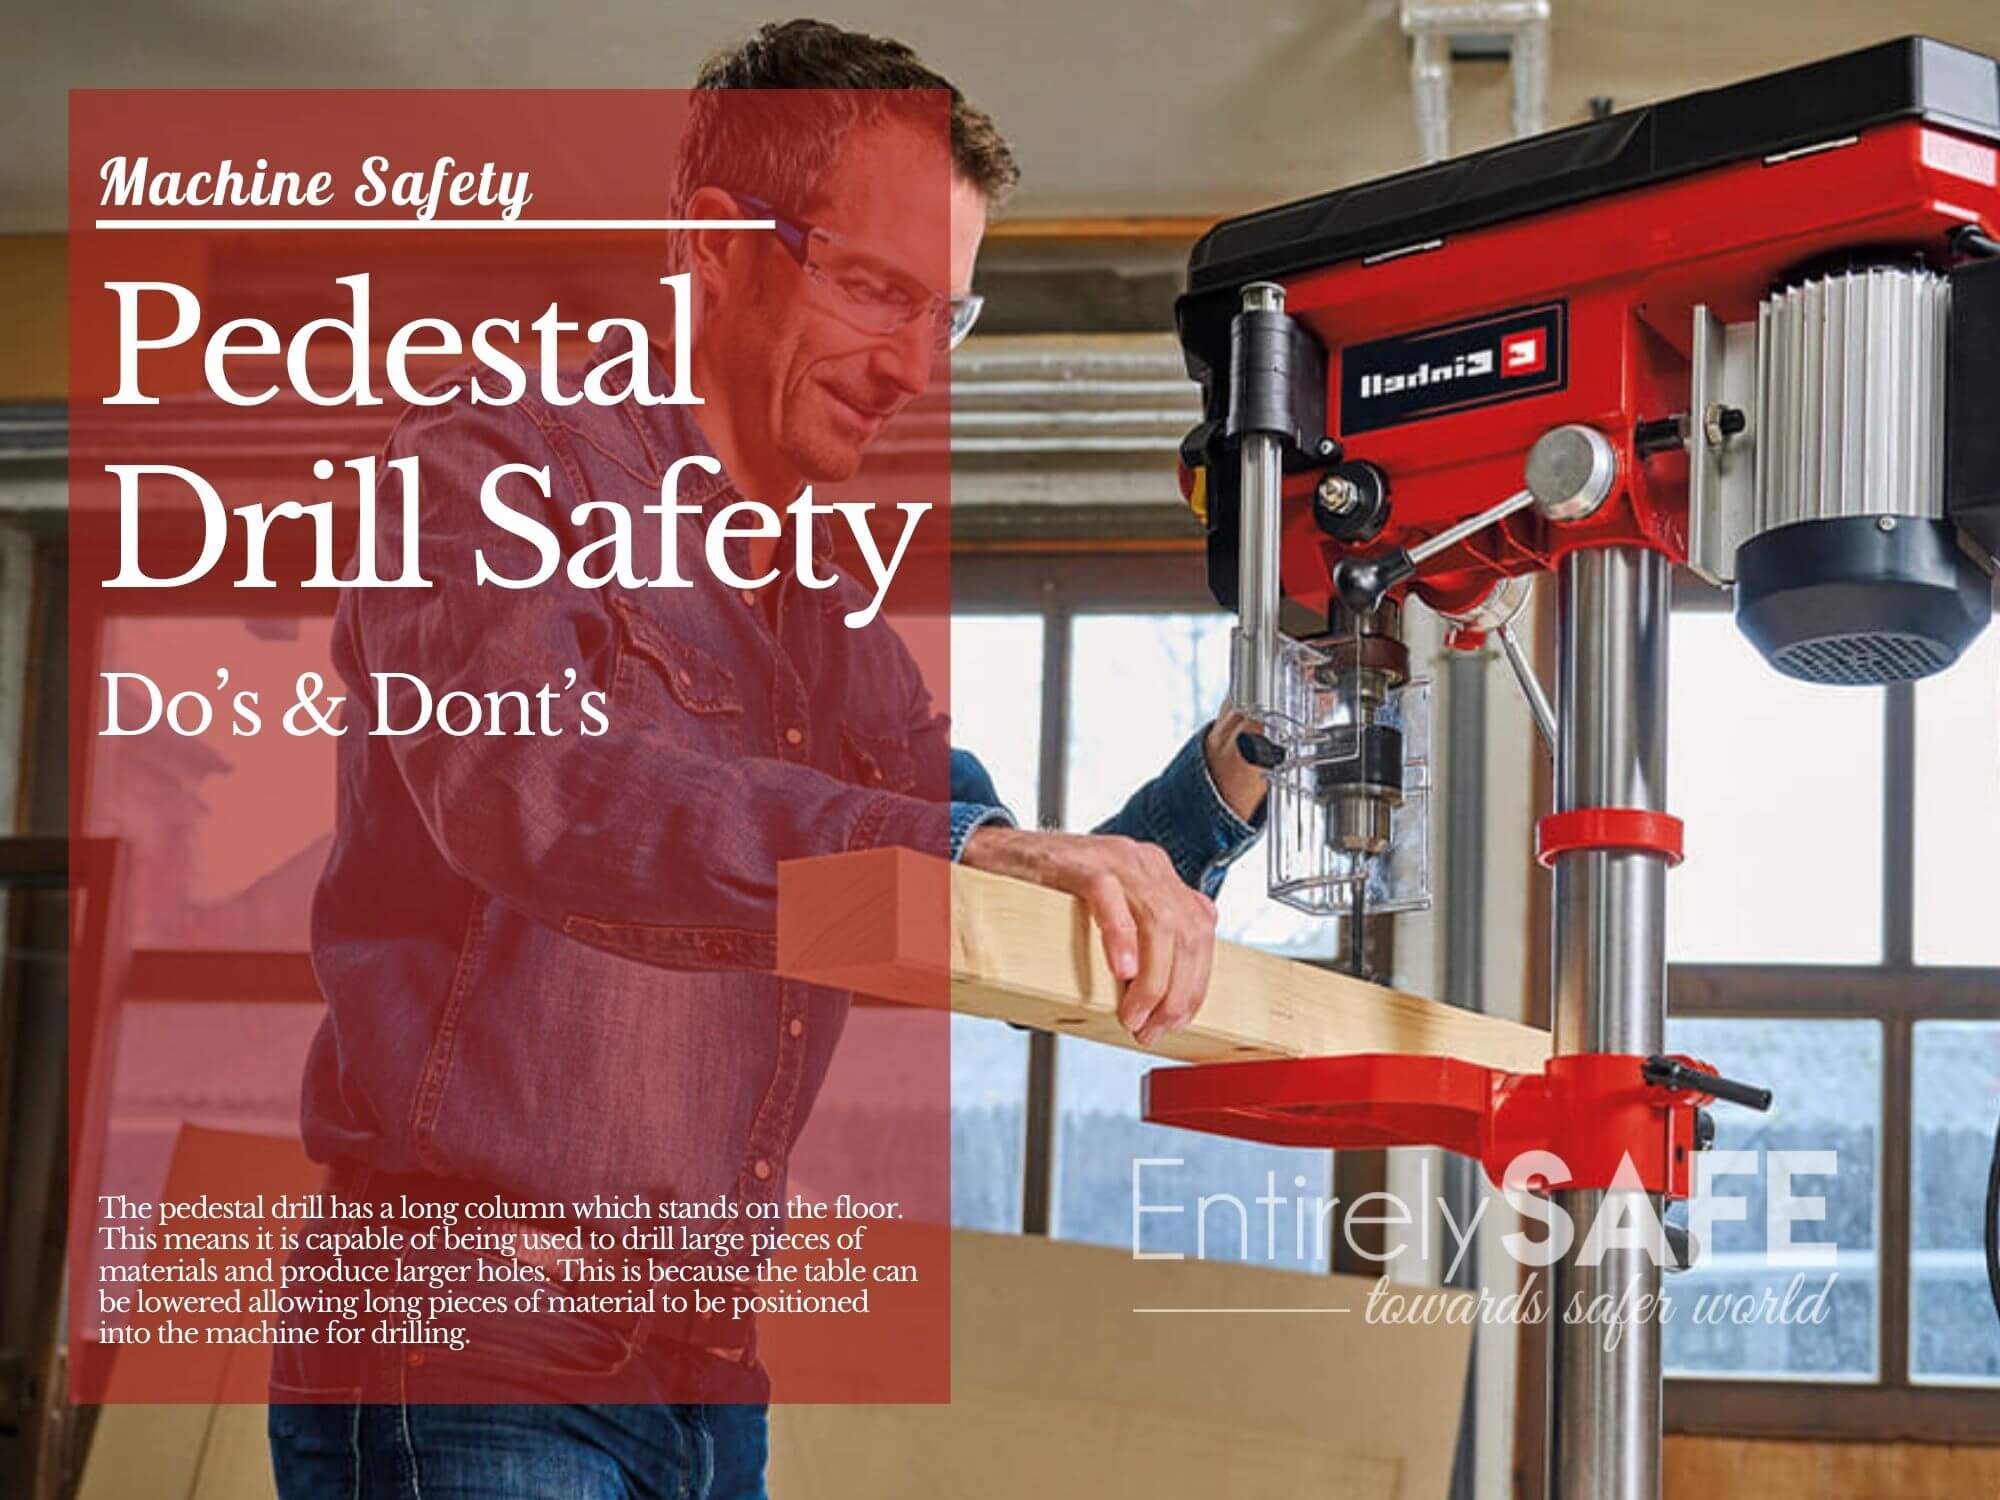 Pedestal or Bench Drill Safety